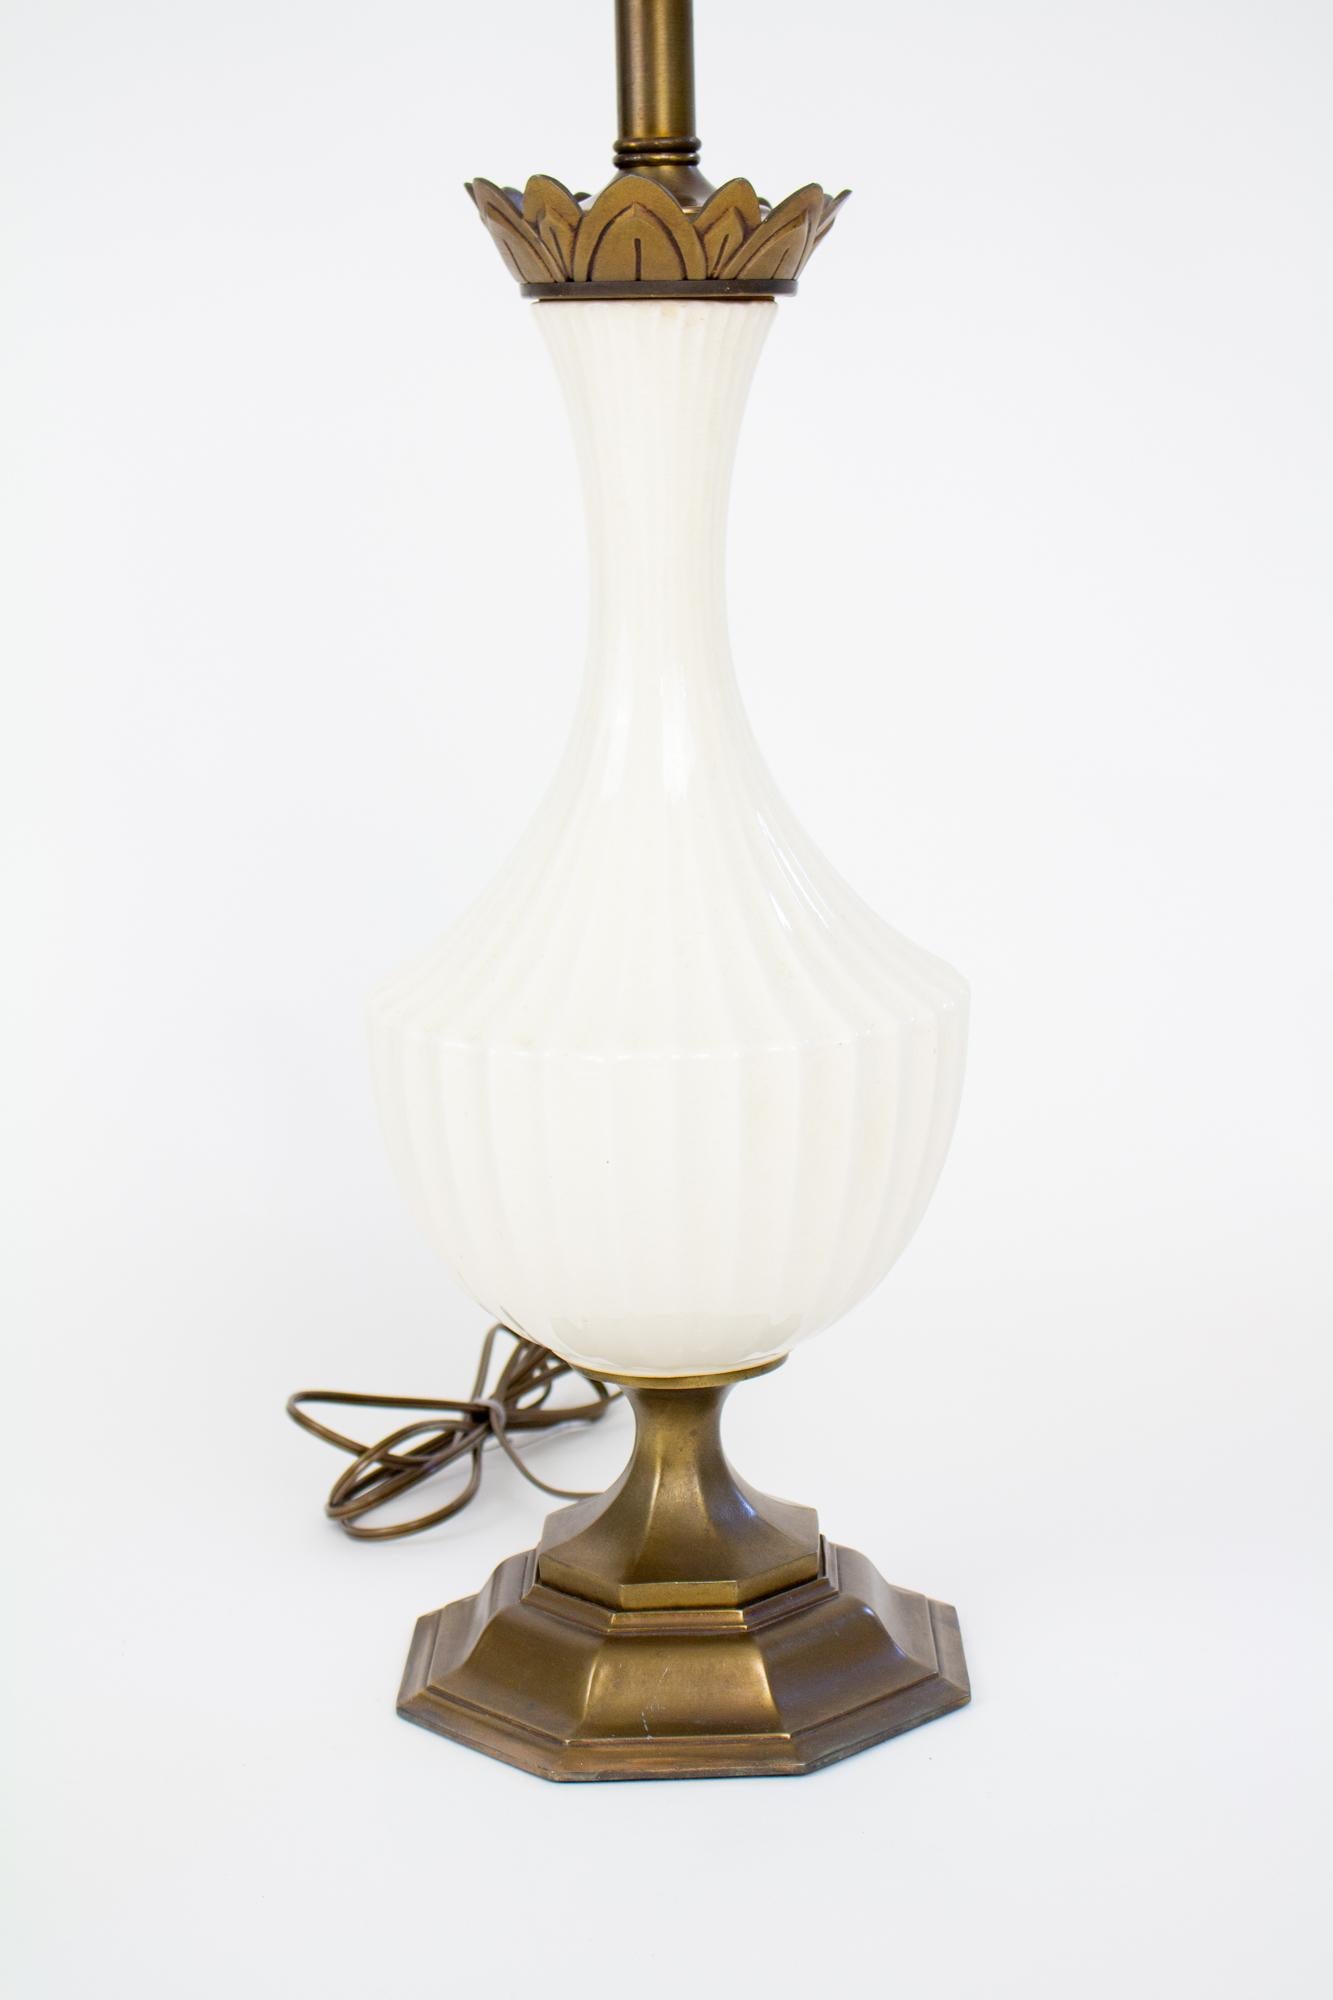 Mid 20th century crackle glaze table lamp. Crackle glaze porcelain and brass plated base and stem. Slender neck and scalloped edges. Surface cleaned and rewired. Porcelain in excellent condition, some wear to the brass plate finish on base. In